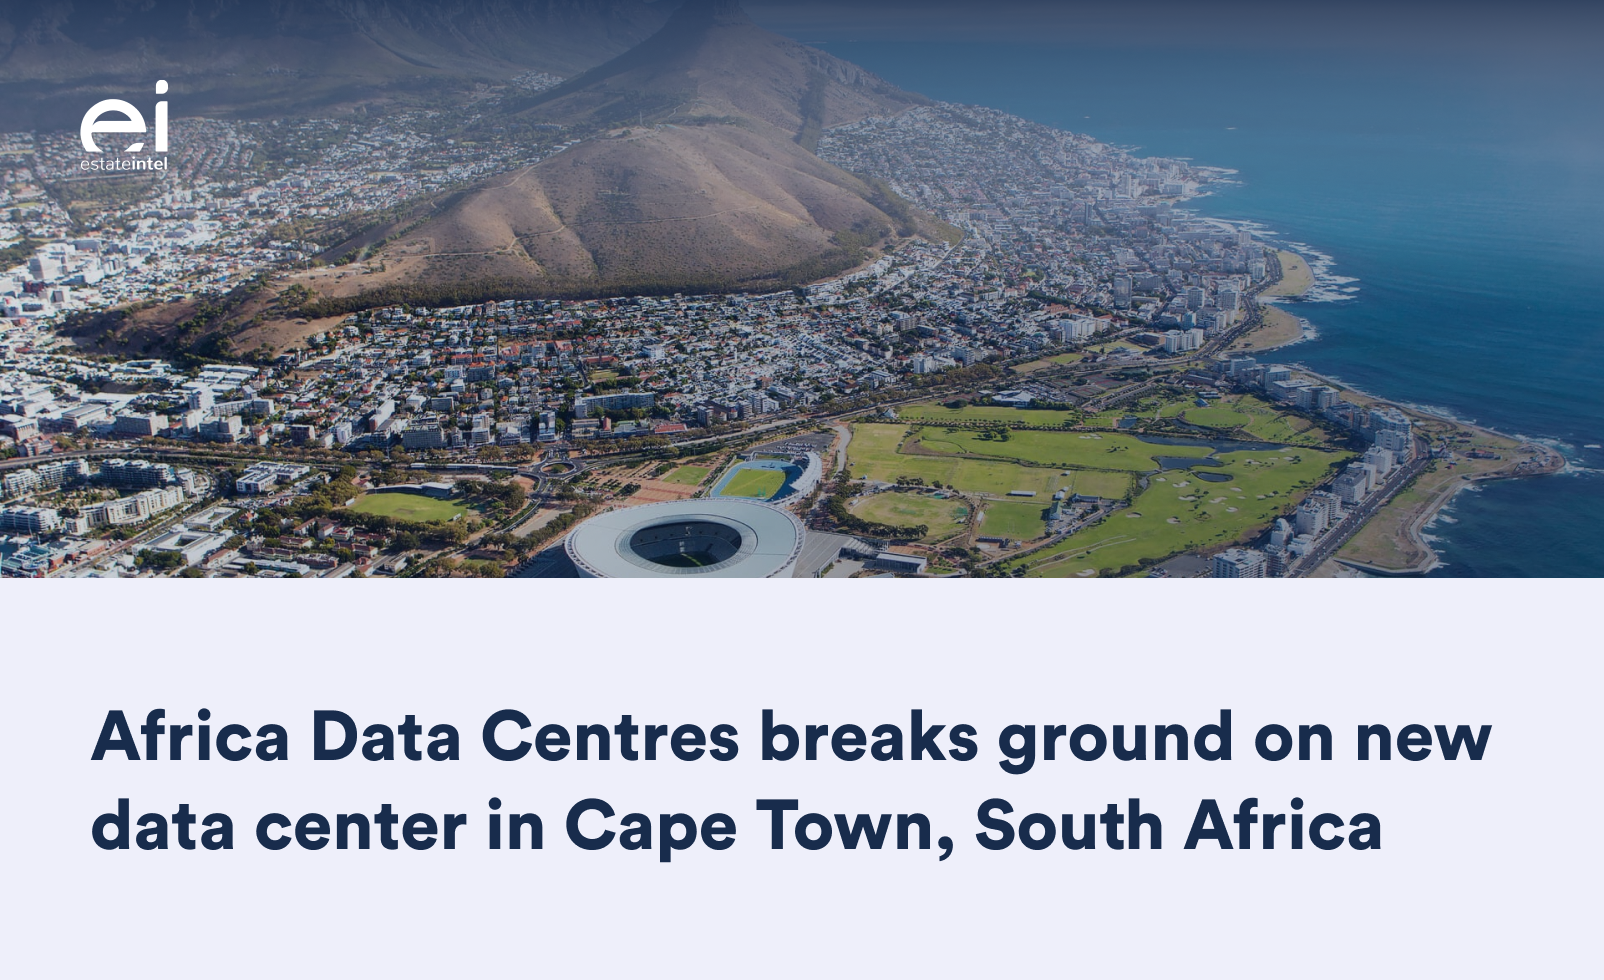 Africa Data Centres breaks ground on new data center in Cape Town, South Africa